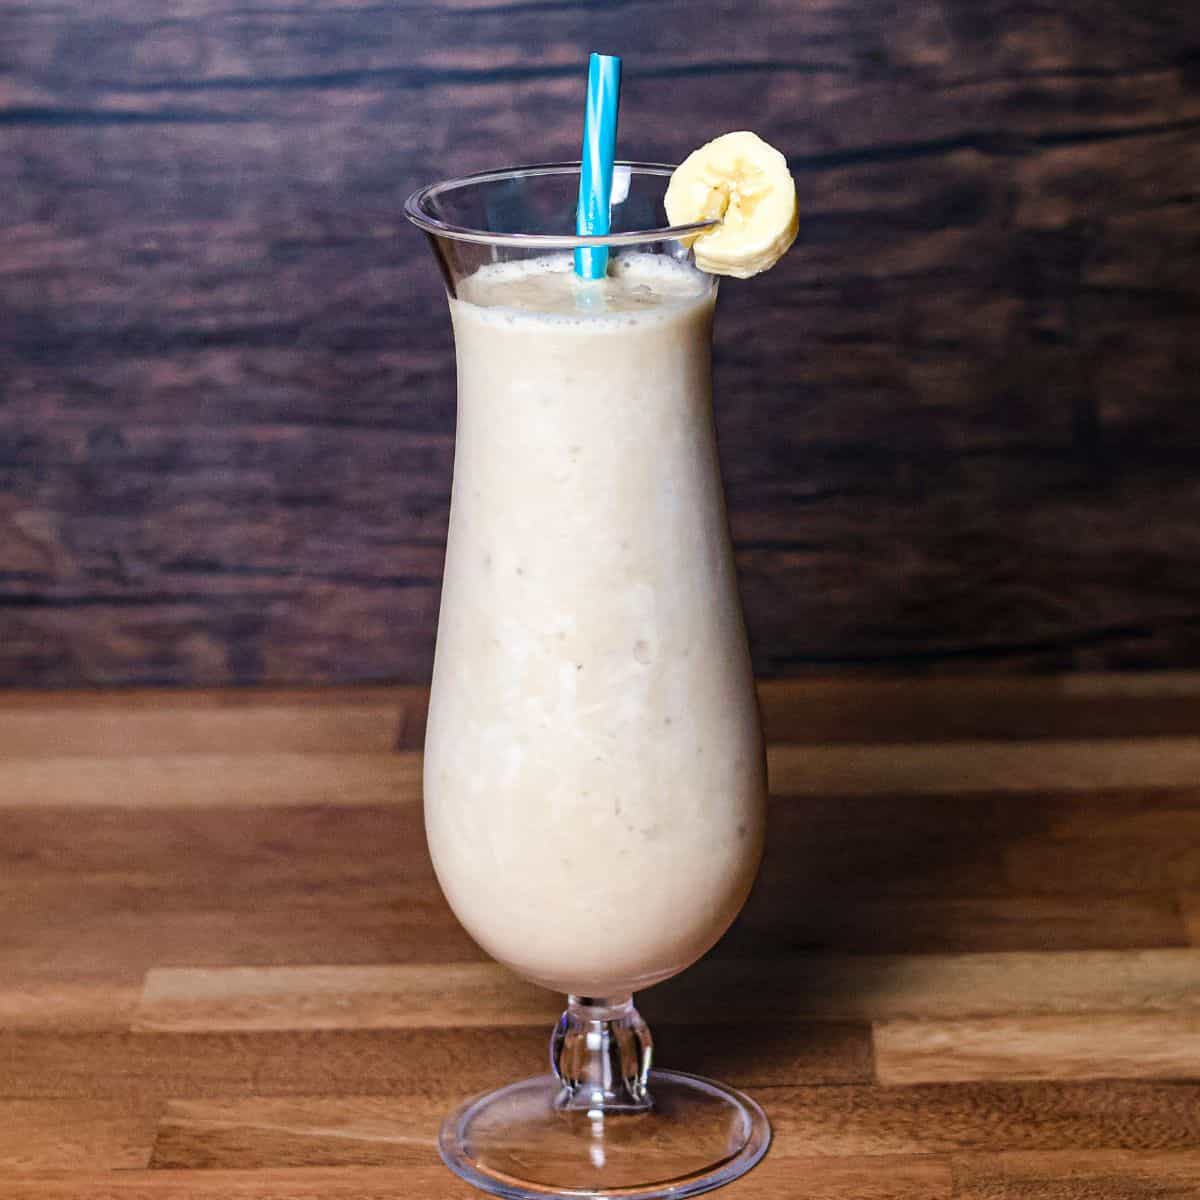 A finished banana boat smoothie in a pina colada glass with a blue striped straw and a banana slice garnish on the side.